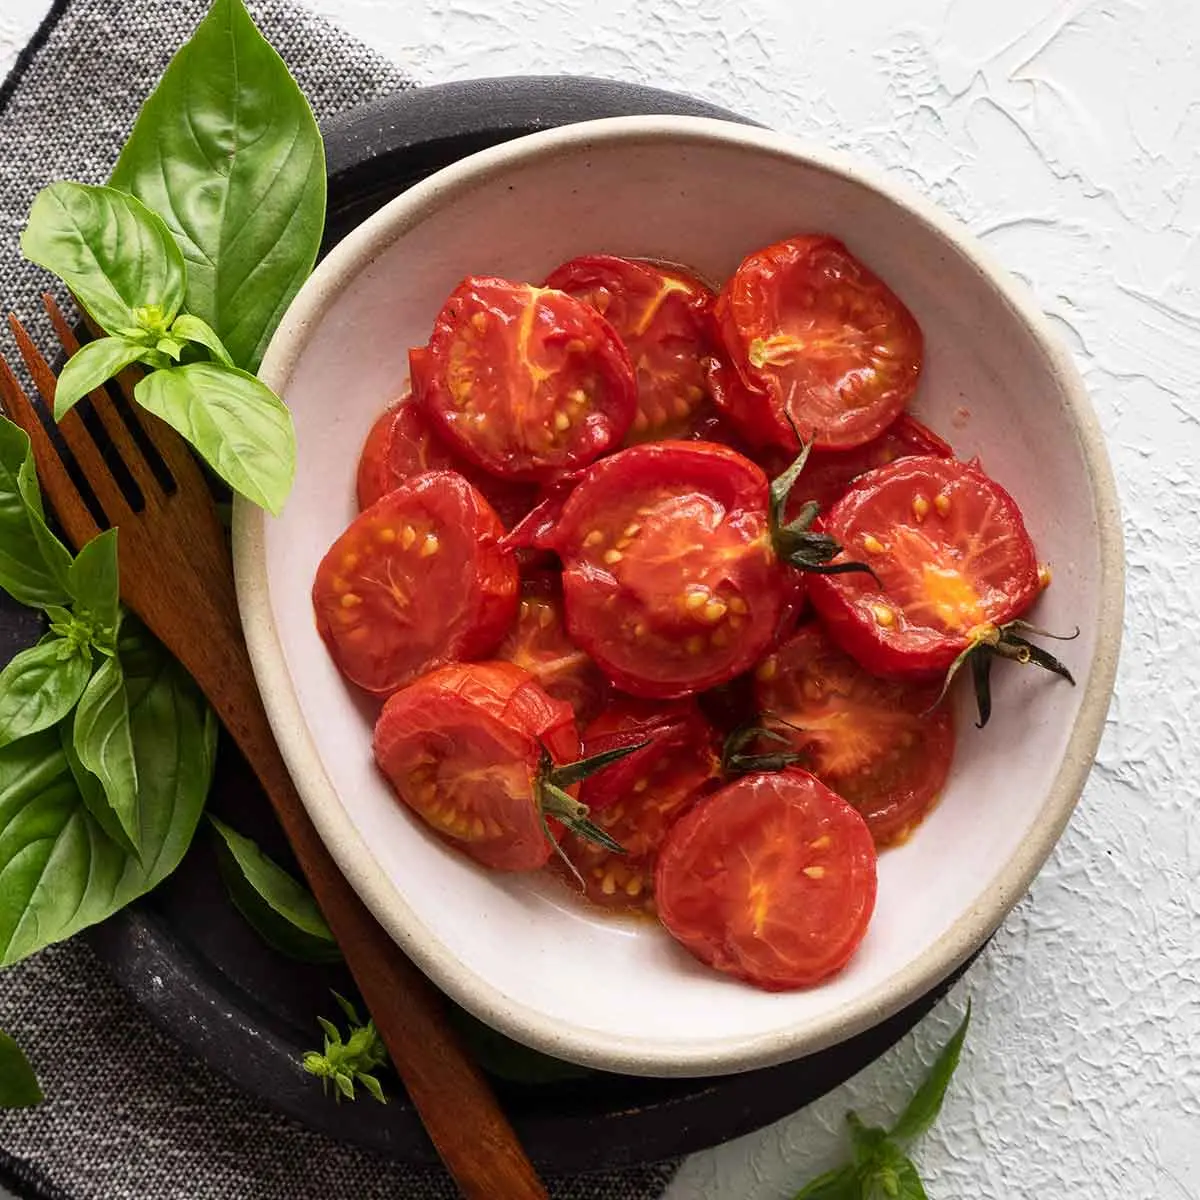 smoked cherry tomatoes - How do you preserve smoked tomatoes